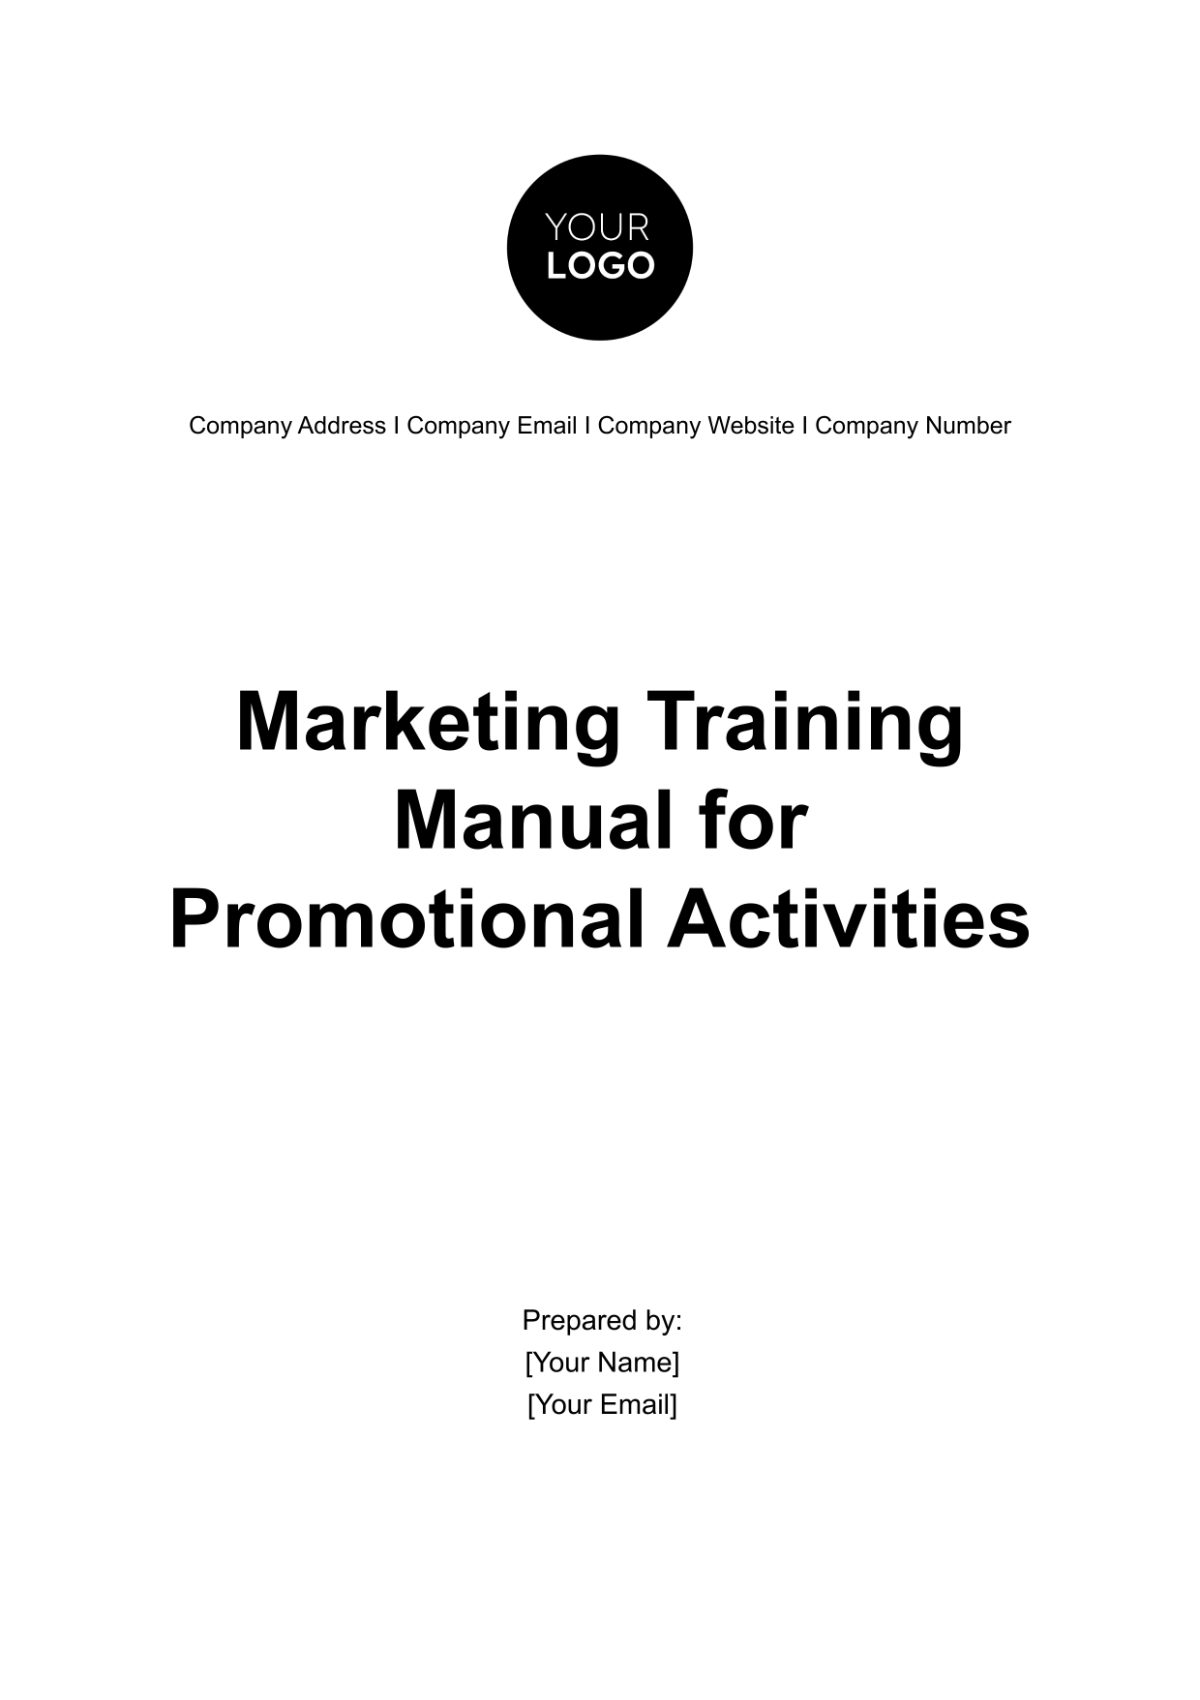 Free Marketing Training Manual for Promotional Activities Template